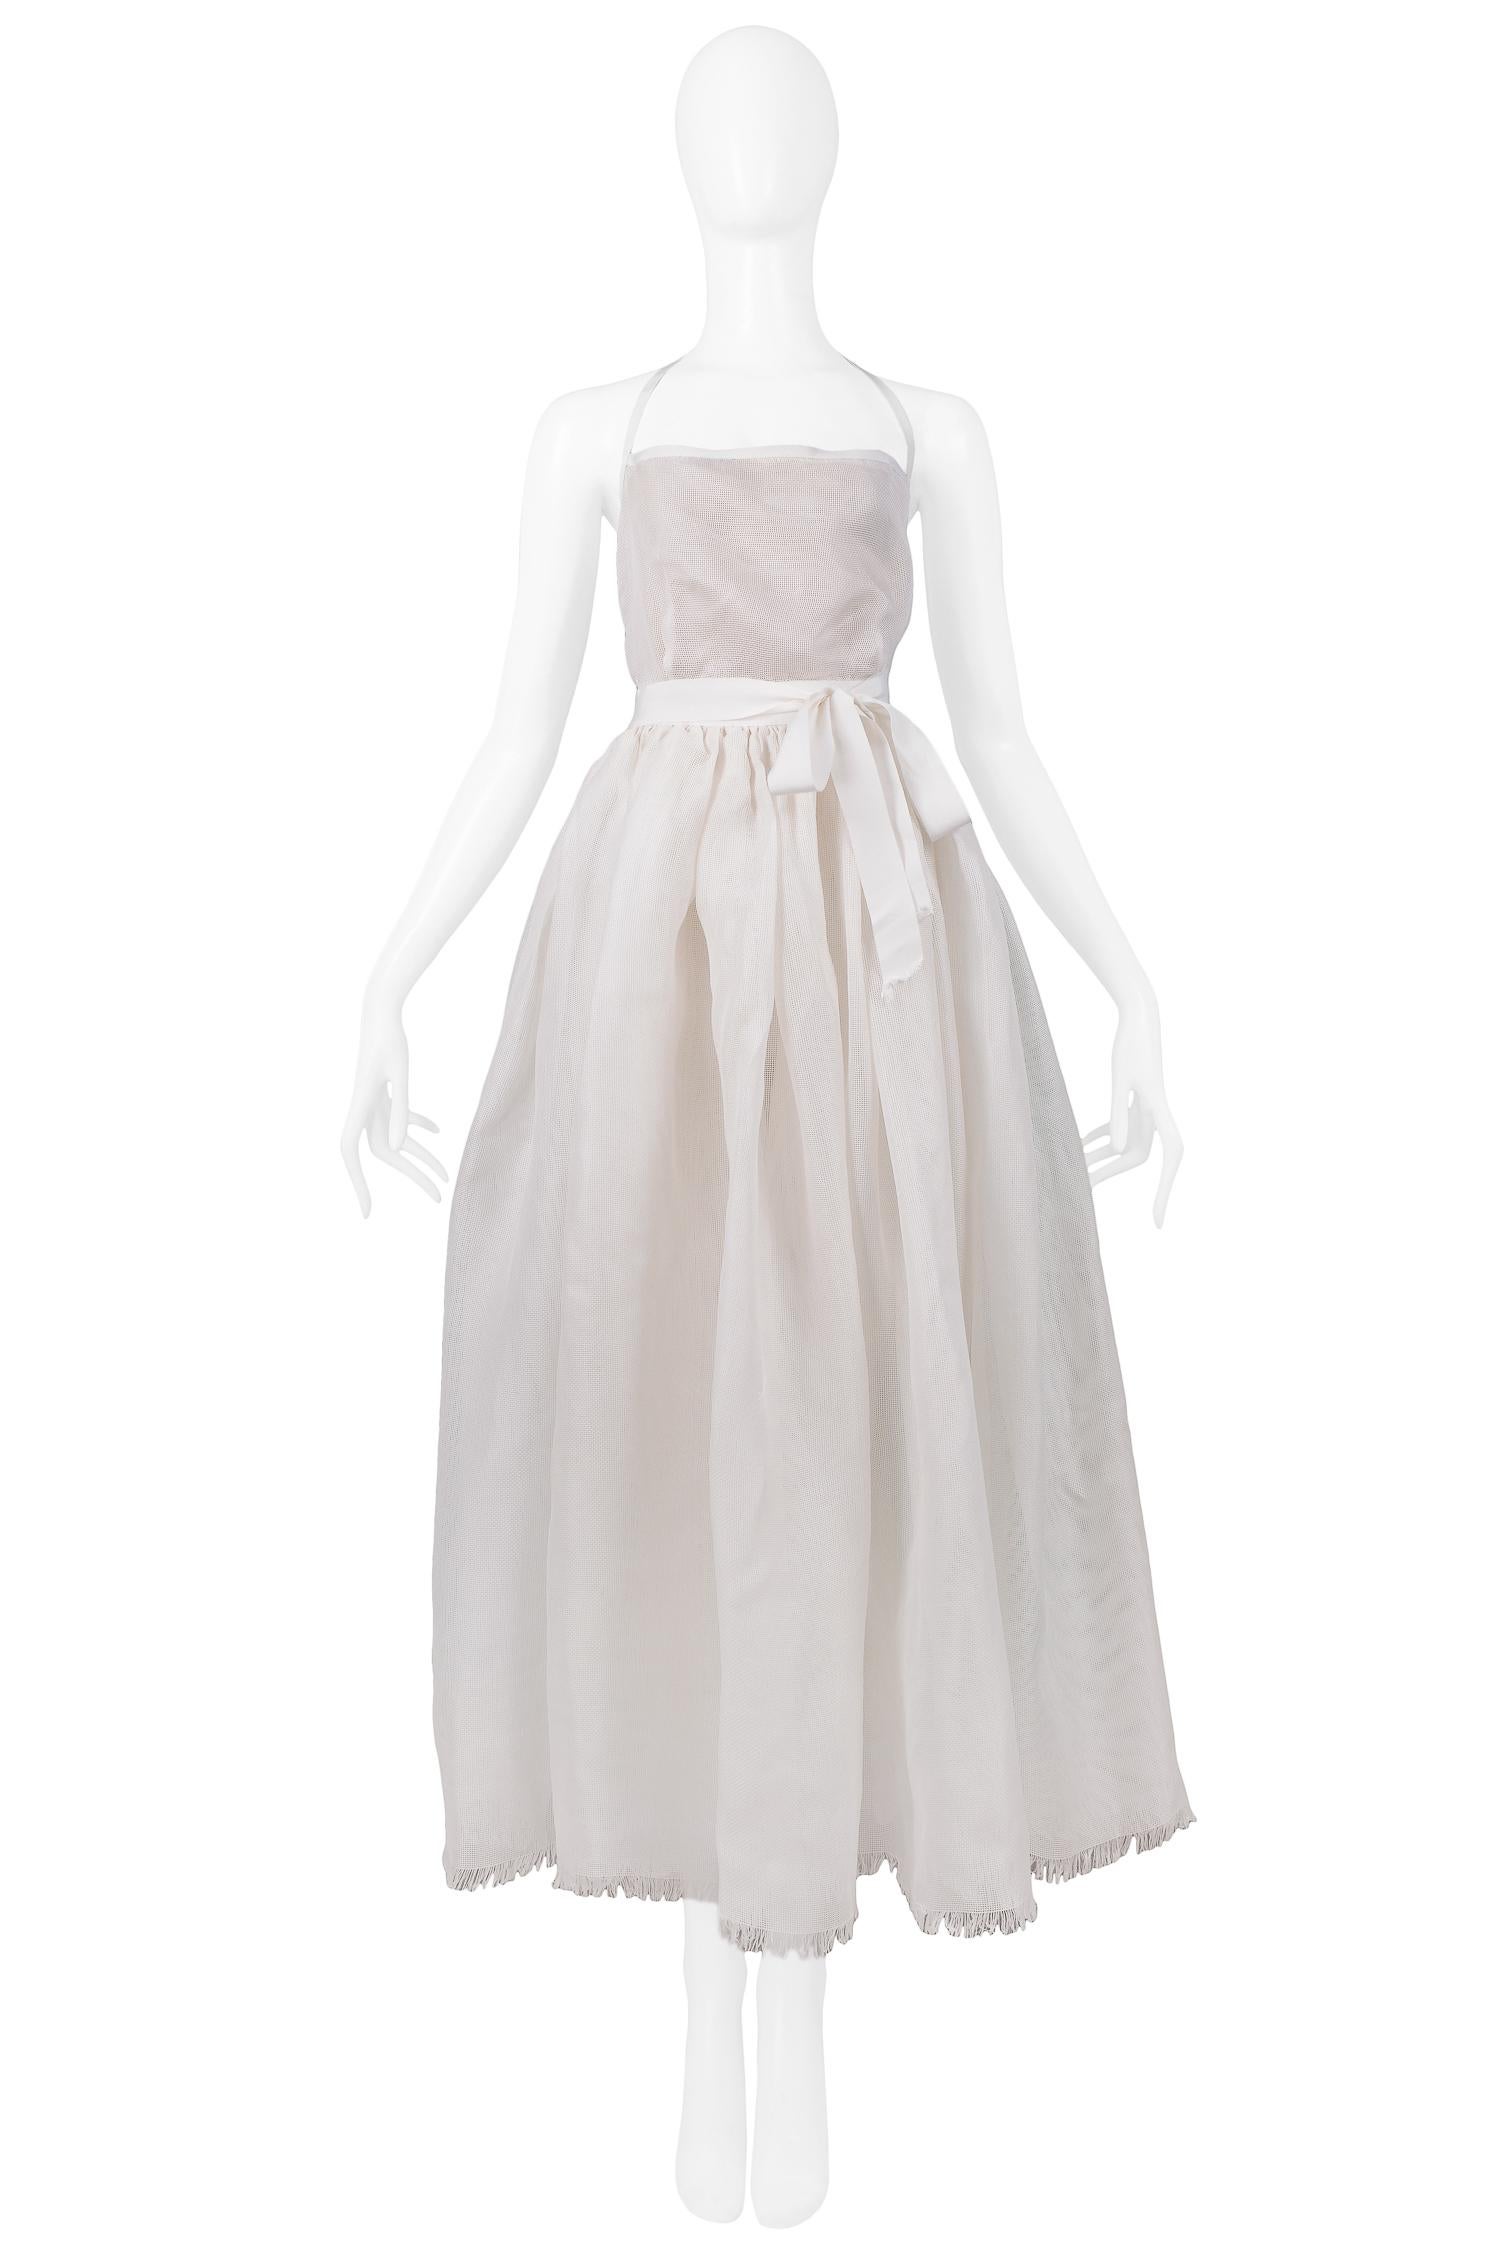 Vintage Isaac Mizrahi off-white silk gazar evening gown. Features a full wrap-around skirt, halter neck, open back, and fringe detail at hem.

Excellent Vintage Condition.

Size: Petite